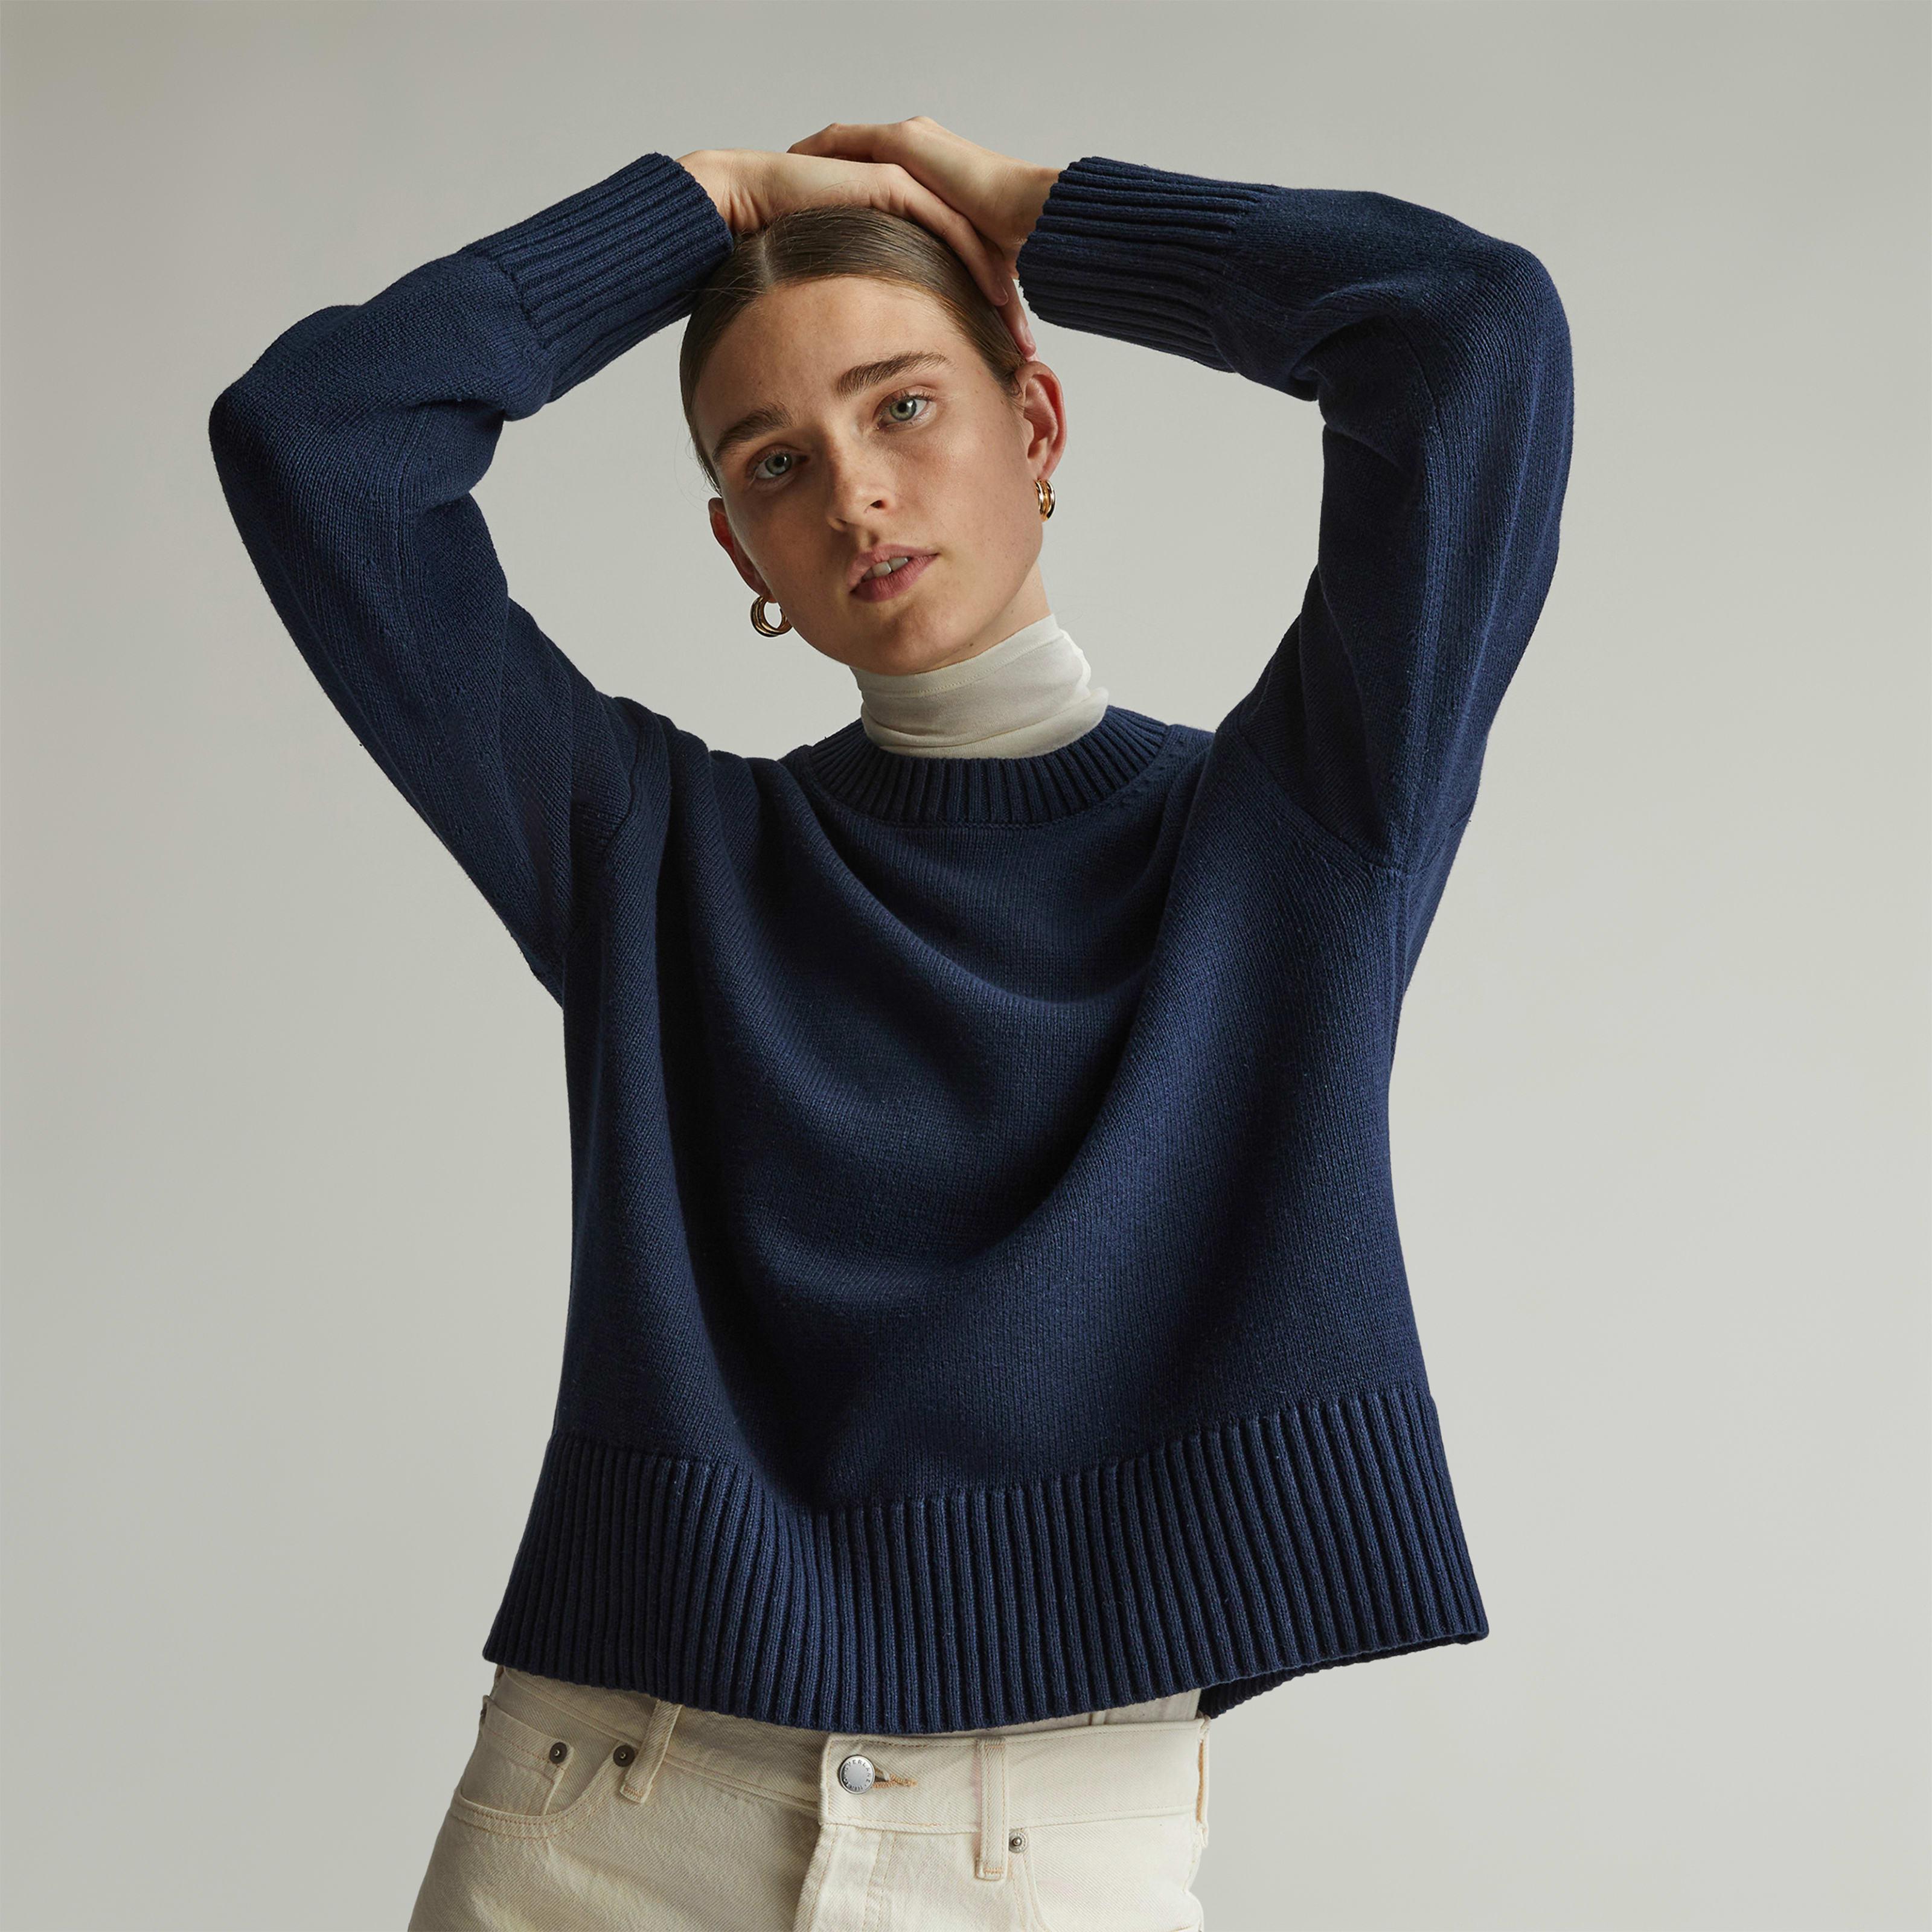 Womens Organic Cotton Crew Sweater by Everlane Product Image